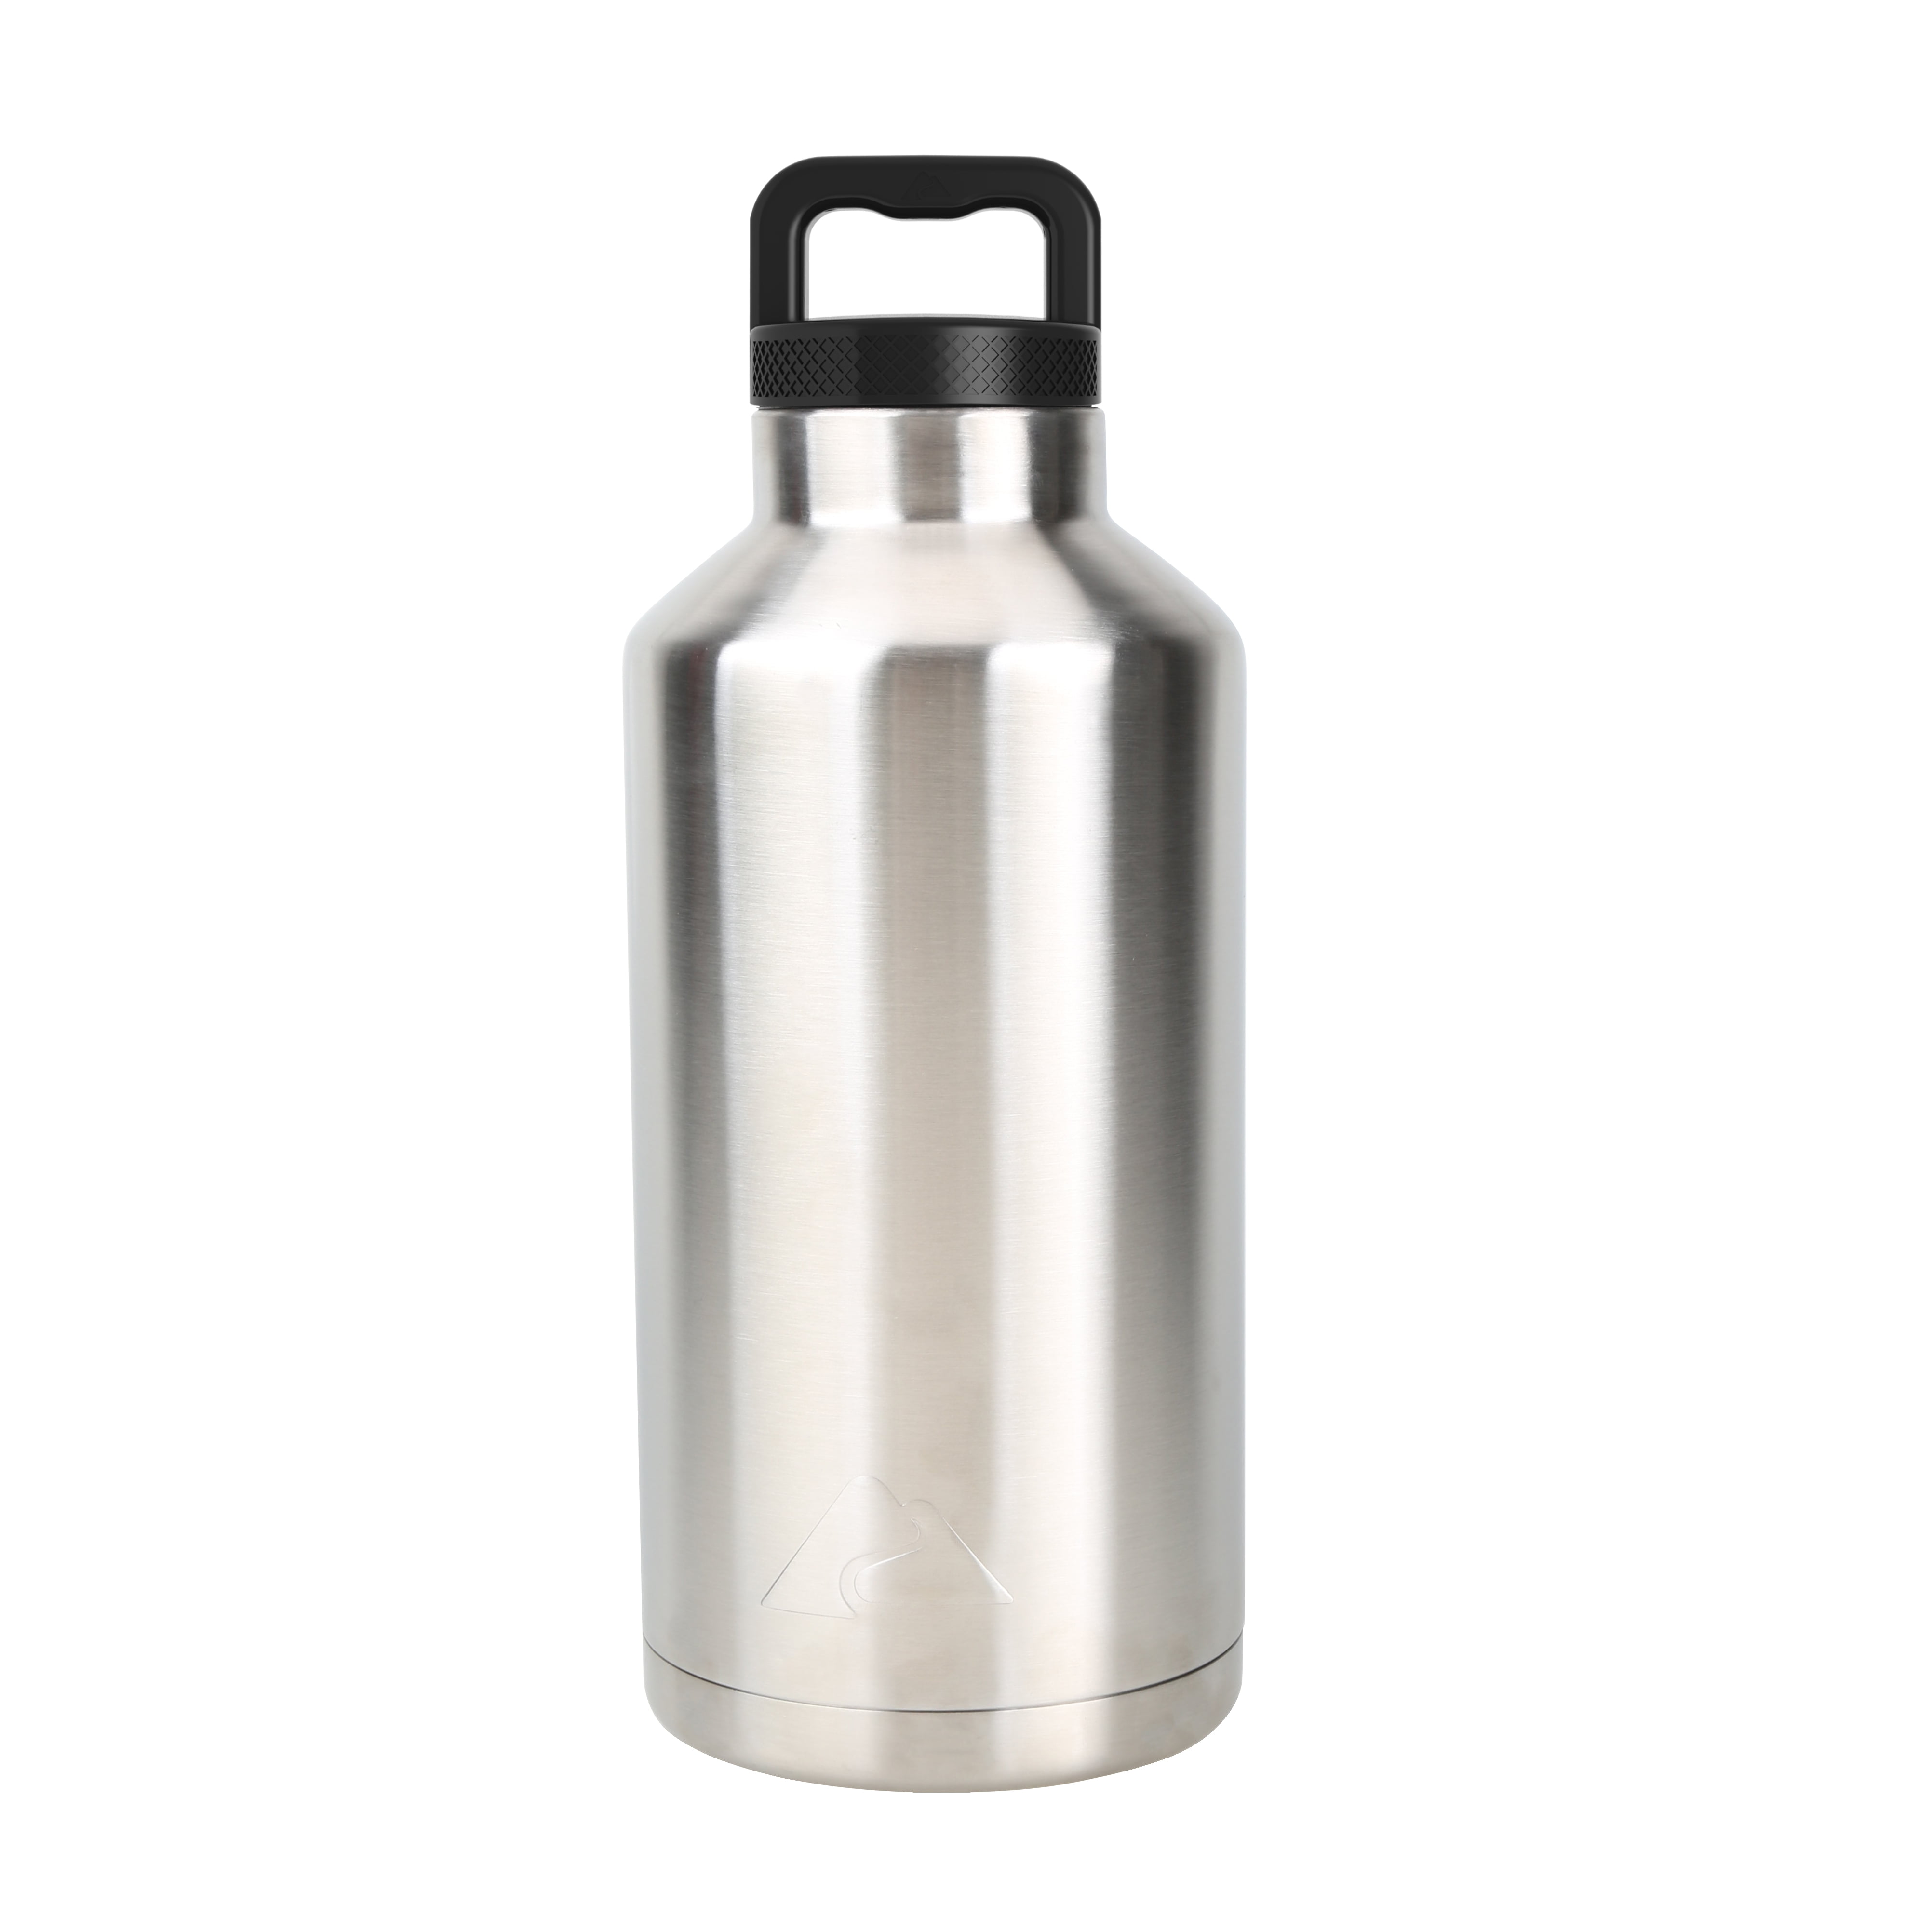 Stainless steel water bottle — THE HILLBILLY THOMISTS